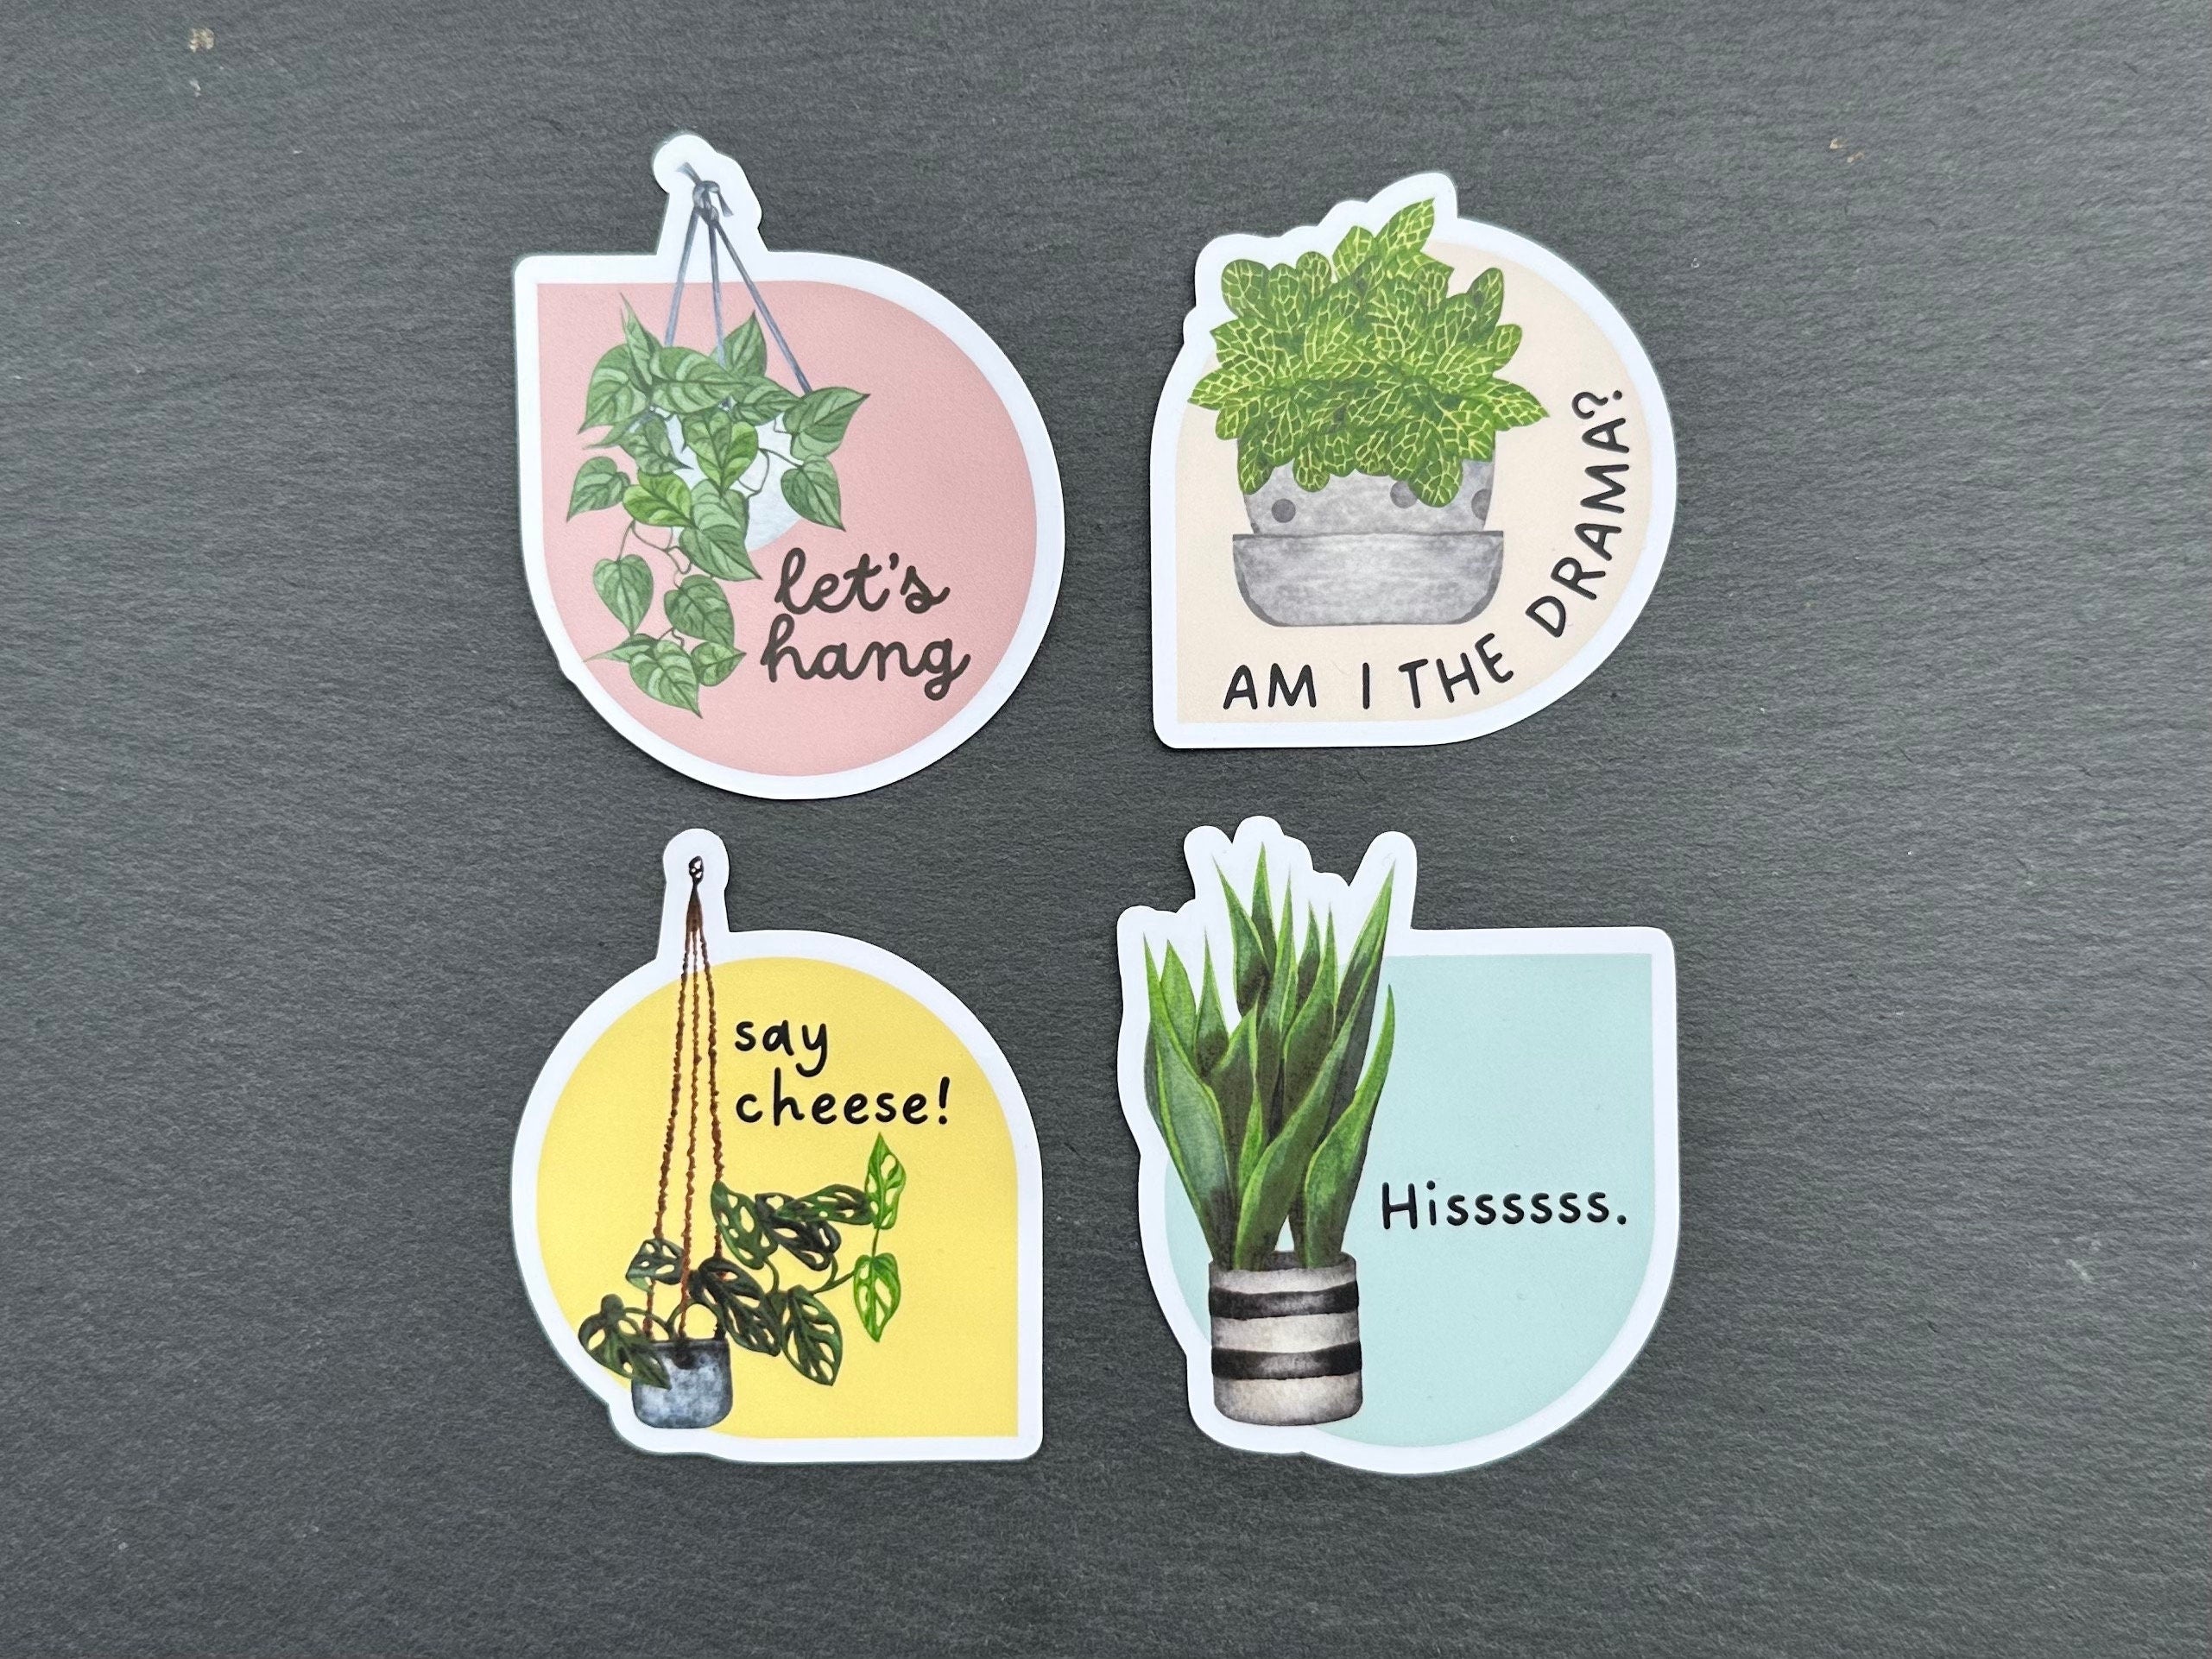 Aesthetic Fittonia Plant Lover Stickers for Water Bottle, Laptop | Cheese Plant Sticker